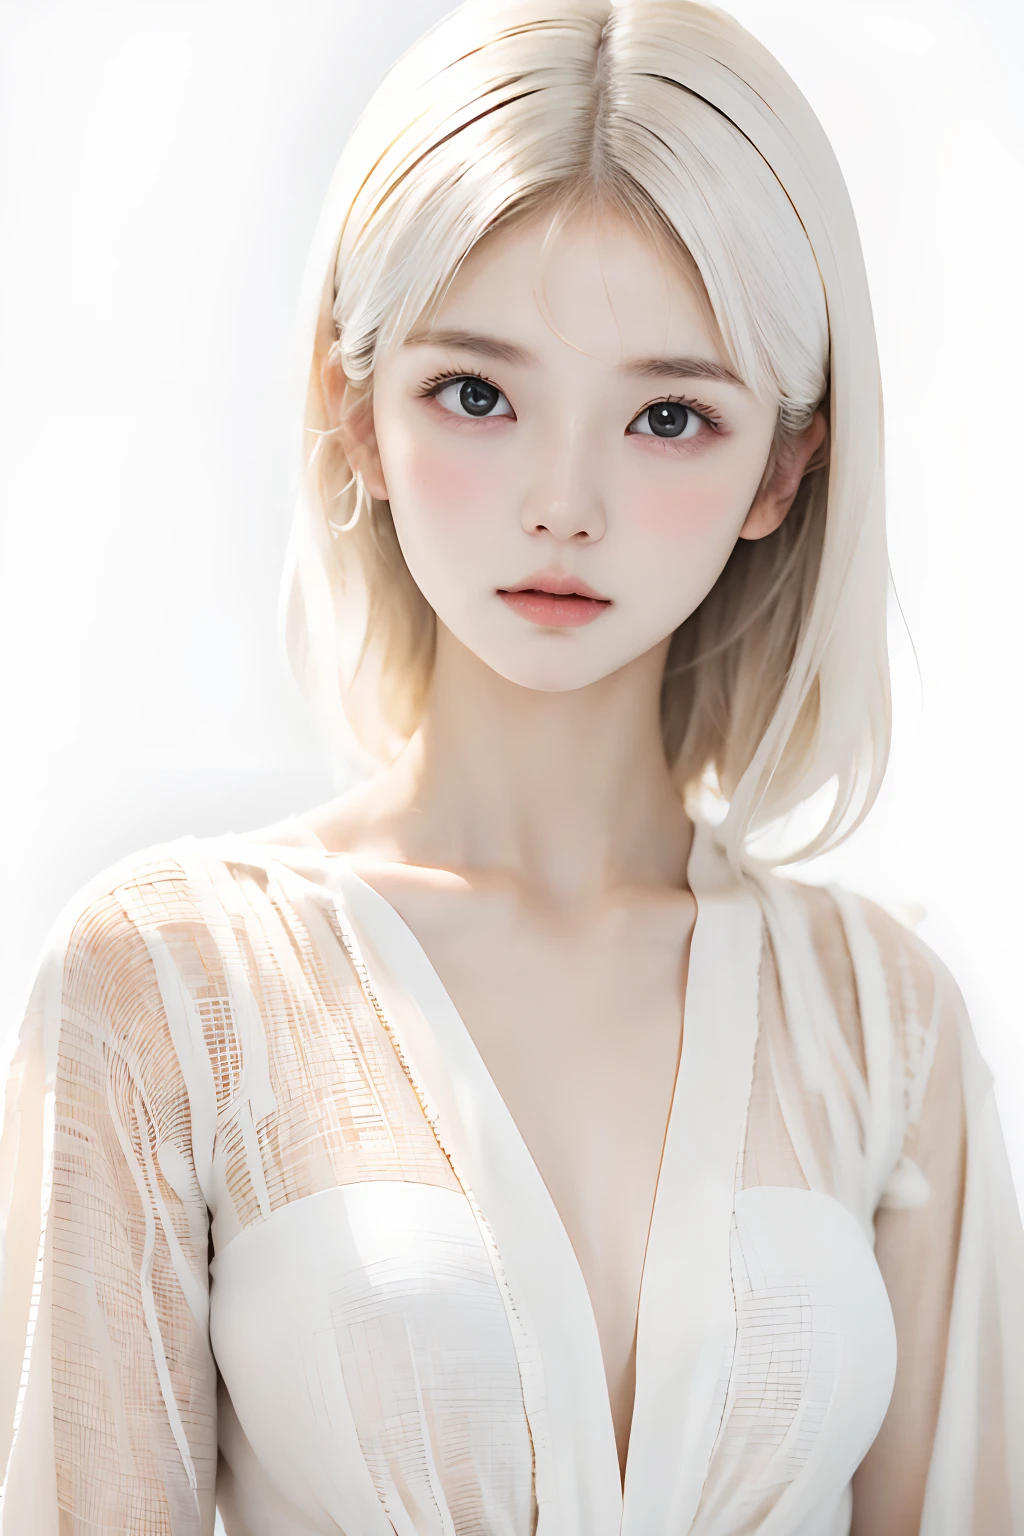 (((White background:1.3)))、Best Quality, masuter piece, High resolution, albino girl、beautiful white hair:1.5、(((1girl in))), sixteen years old,(((eyes are white:1.3)))、robe blanche、((White shirt:1.3、White Block Dress)), Tindall Effect, Realistic, Shadow Studio,Ultramarine Lighting, dual-tone lighting, (High Detail Skins: 1.2)、Pale colored lighting、Dark lighting、 Digital SLR, Photo, High resolution, 4K, 8K, Background blur,Fade out beautifully、a white world、White background